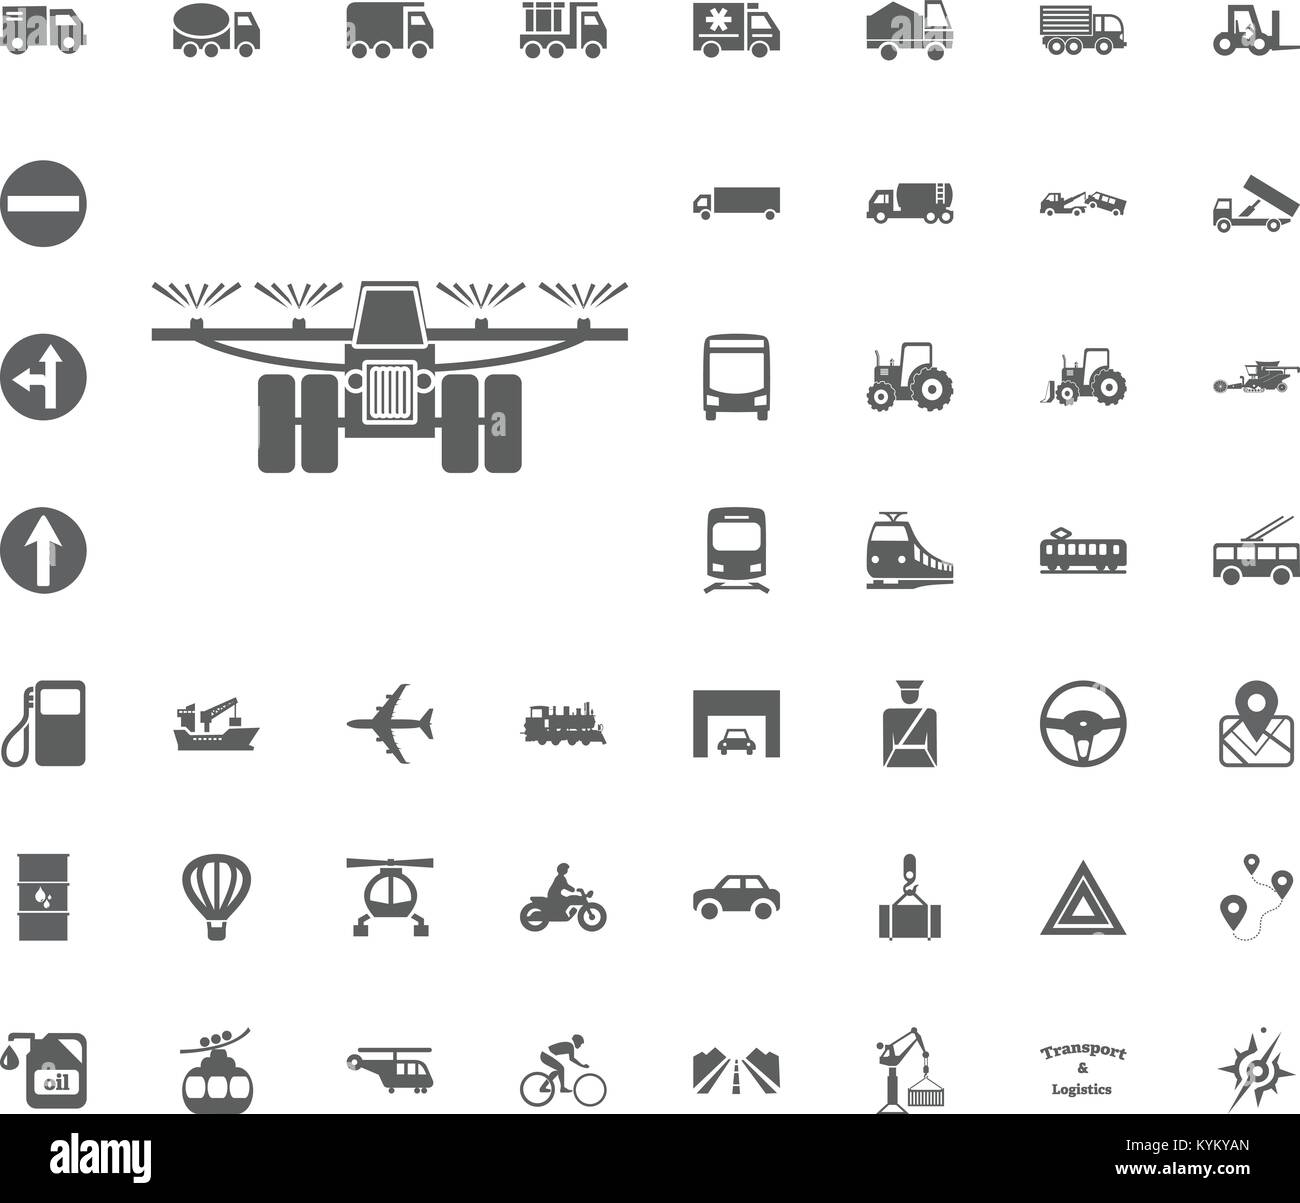 Combine icon. Transport and Logistics set icons. Transportation set icons. Stock Vector